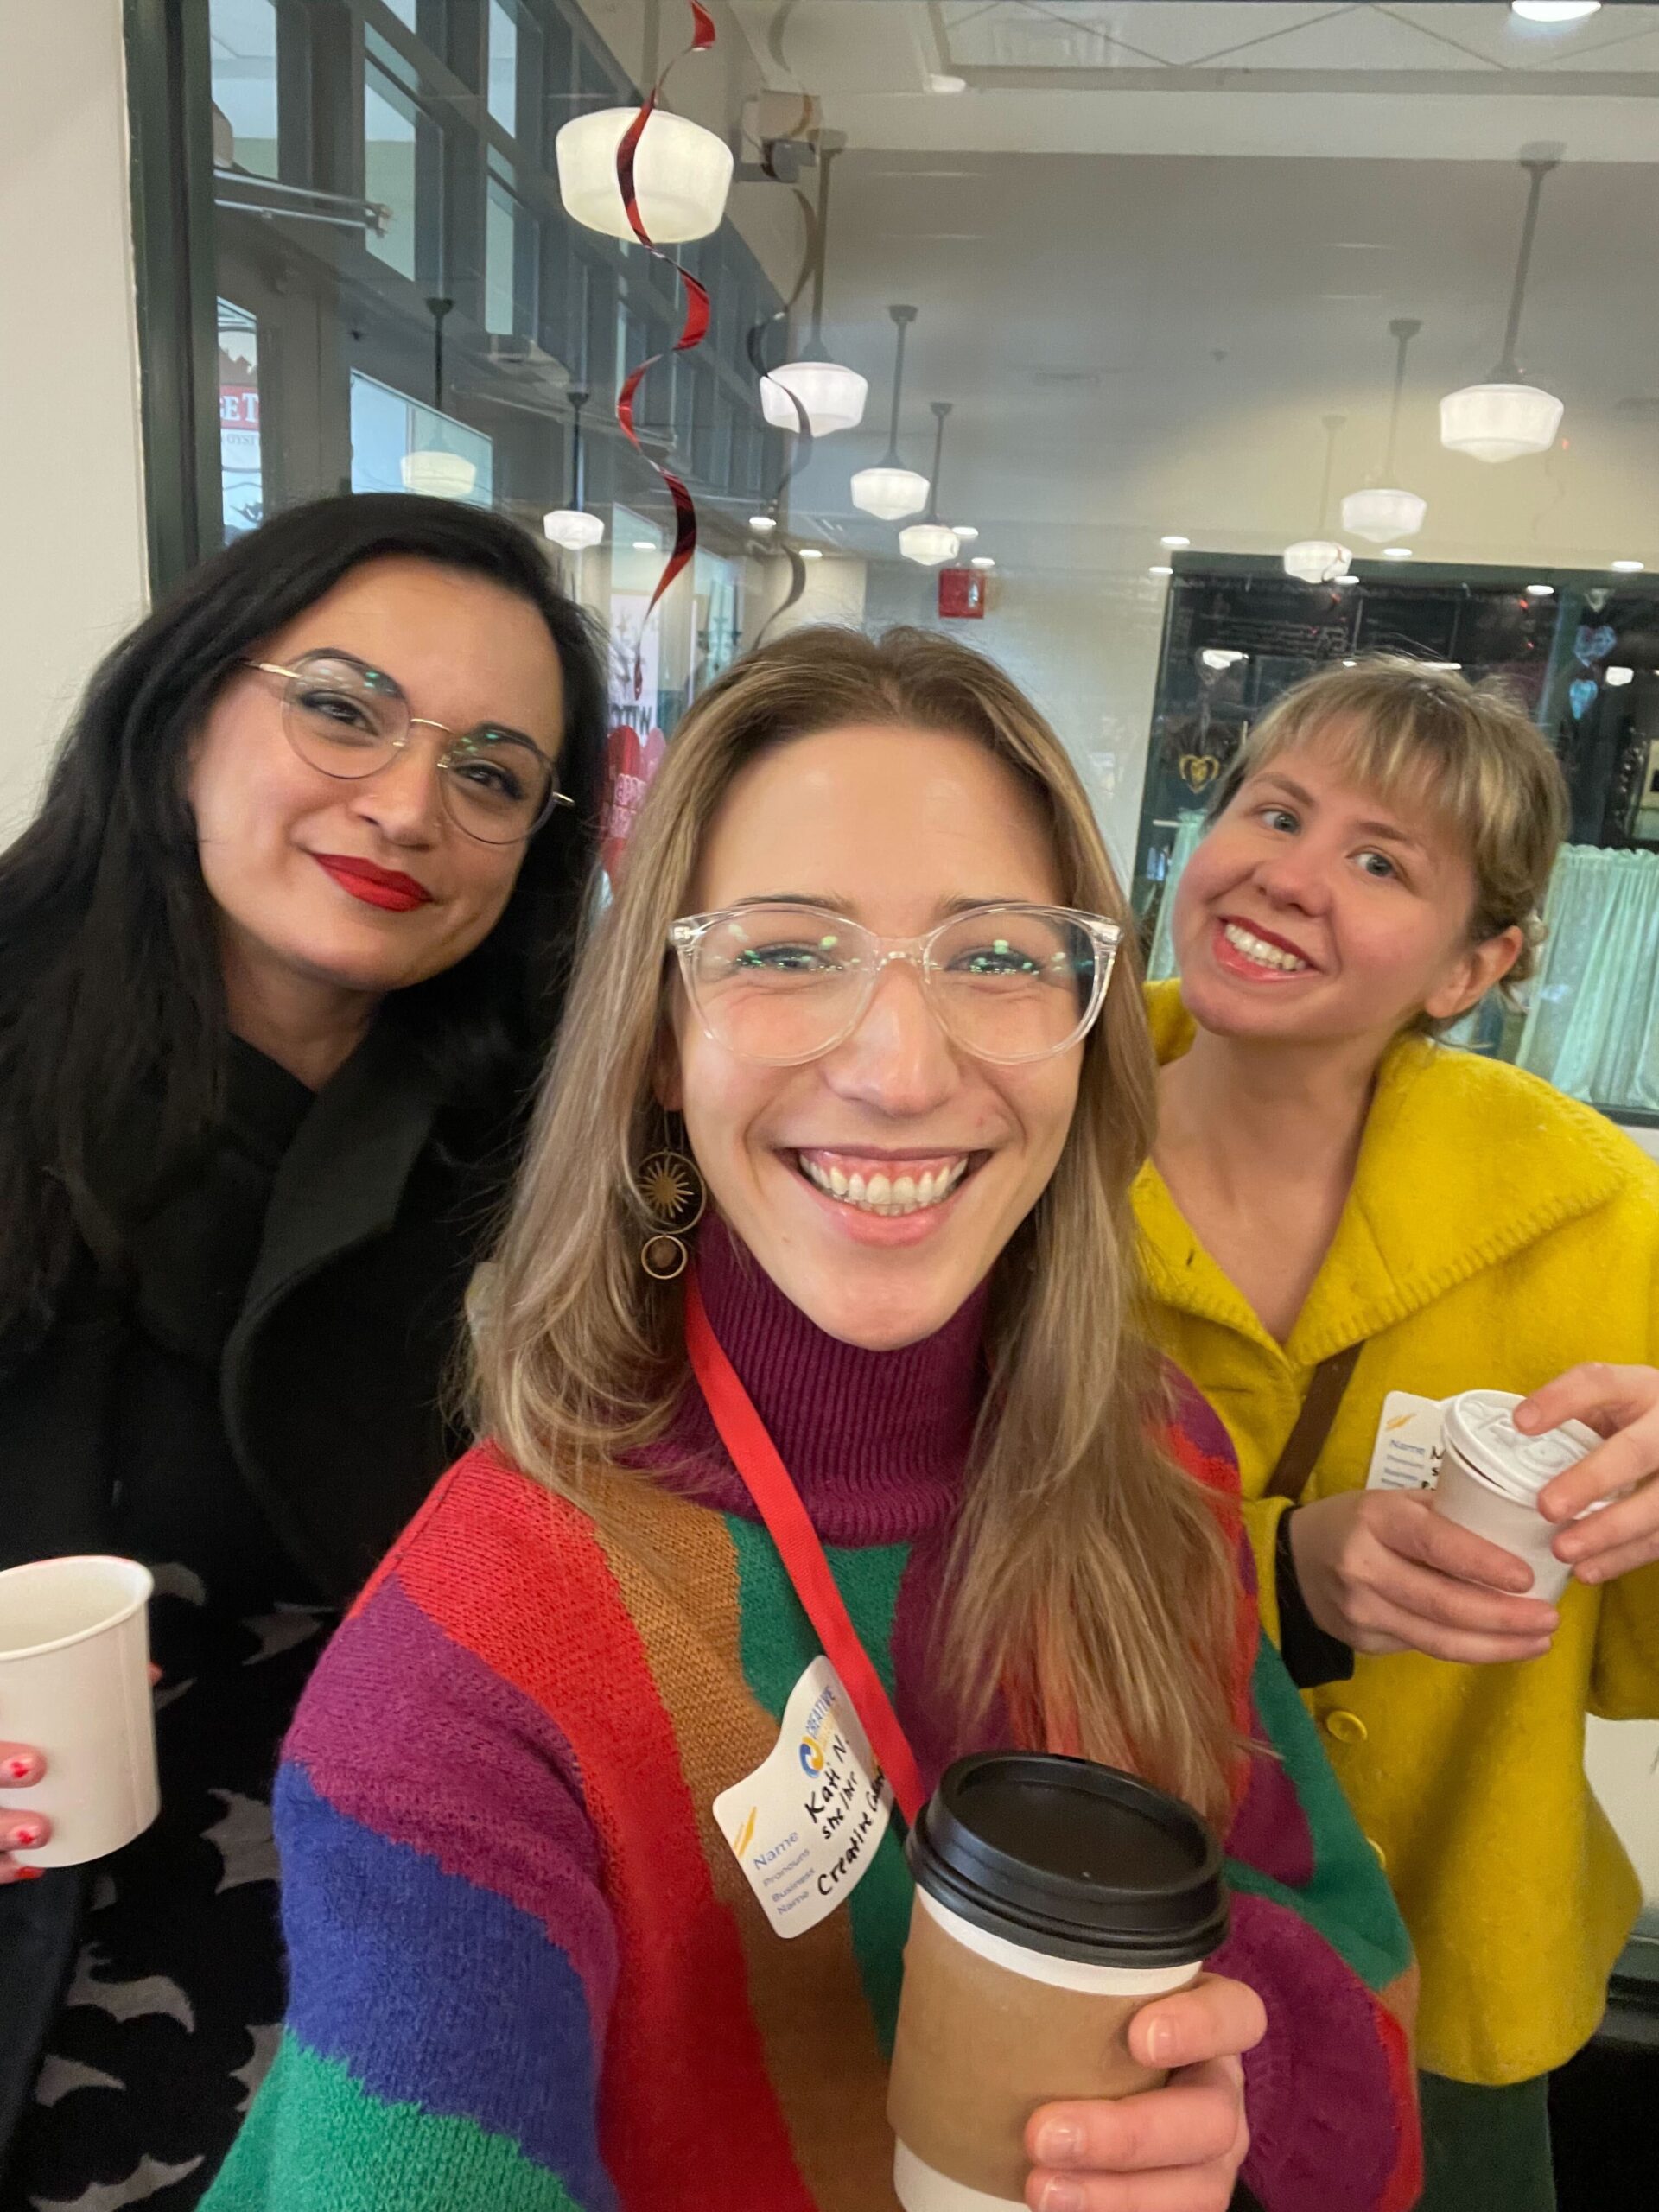 three women holding coffee cups and smiling for the camera.